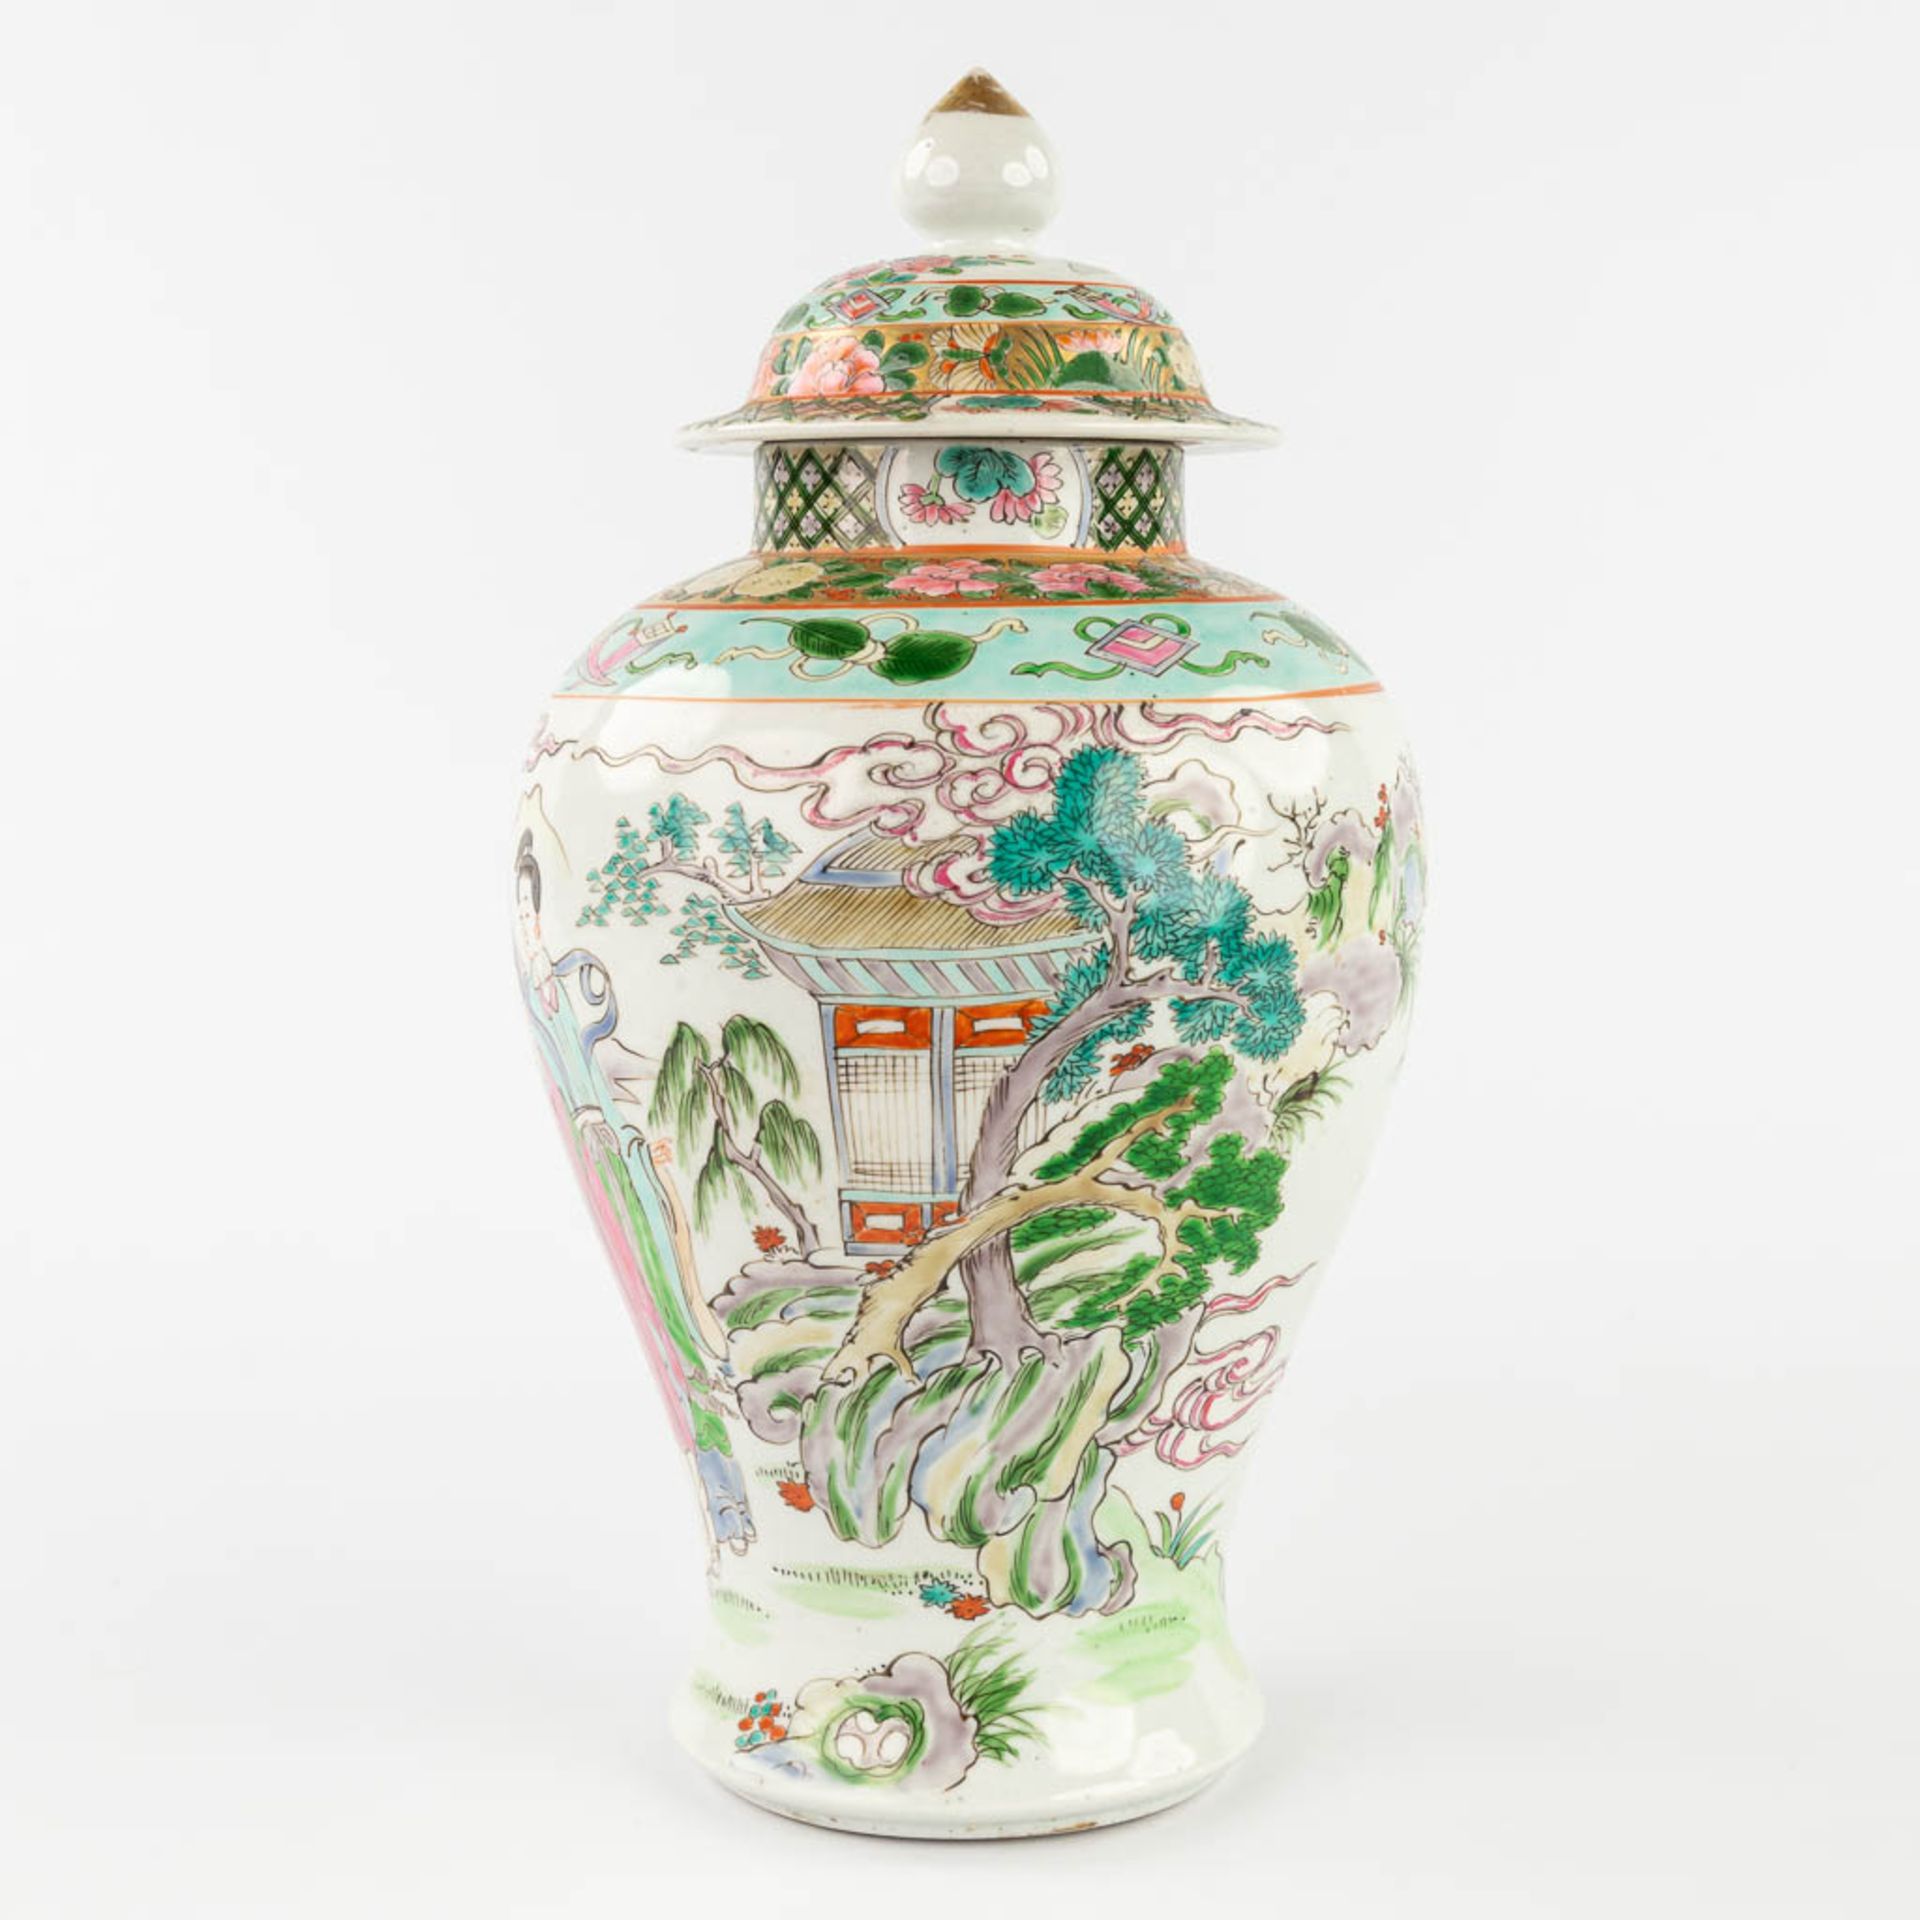 A Japanese baluster vase with lid, decorated with ladies and landscapes. (H:35 x D:18 cm) - Image 3 of 14